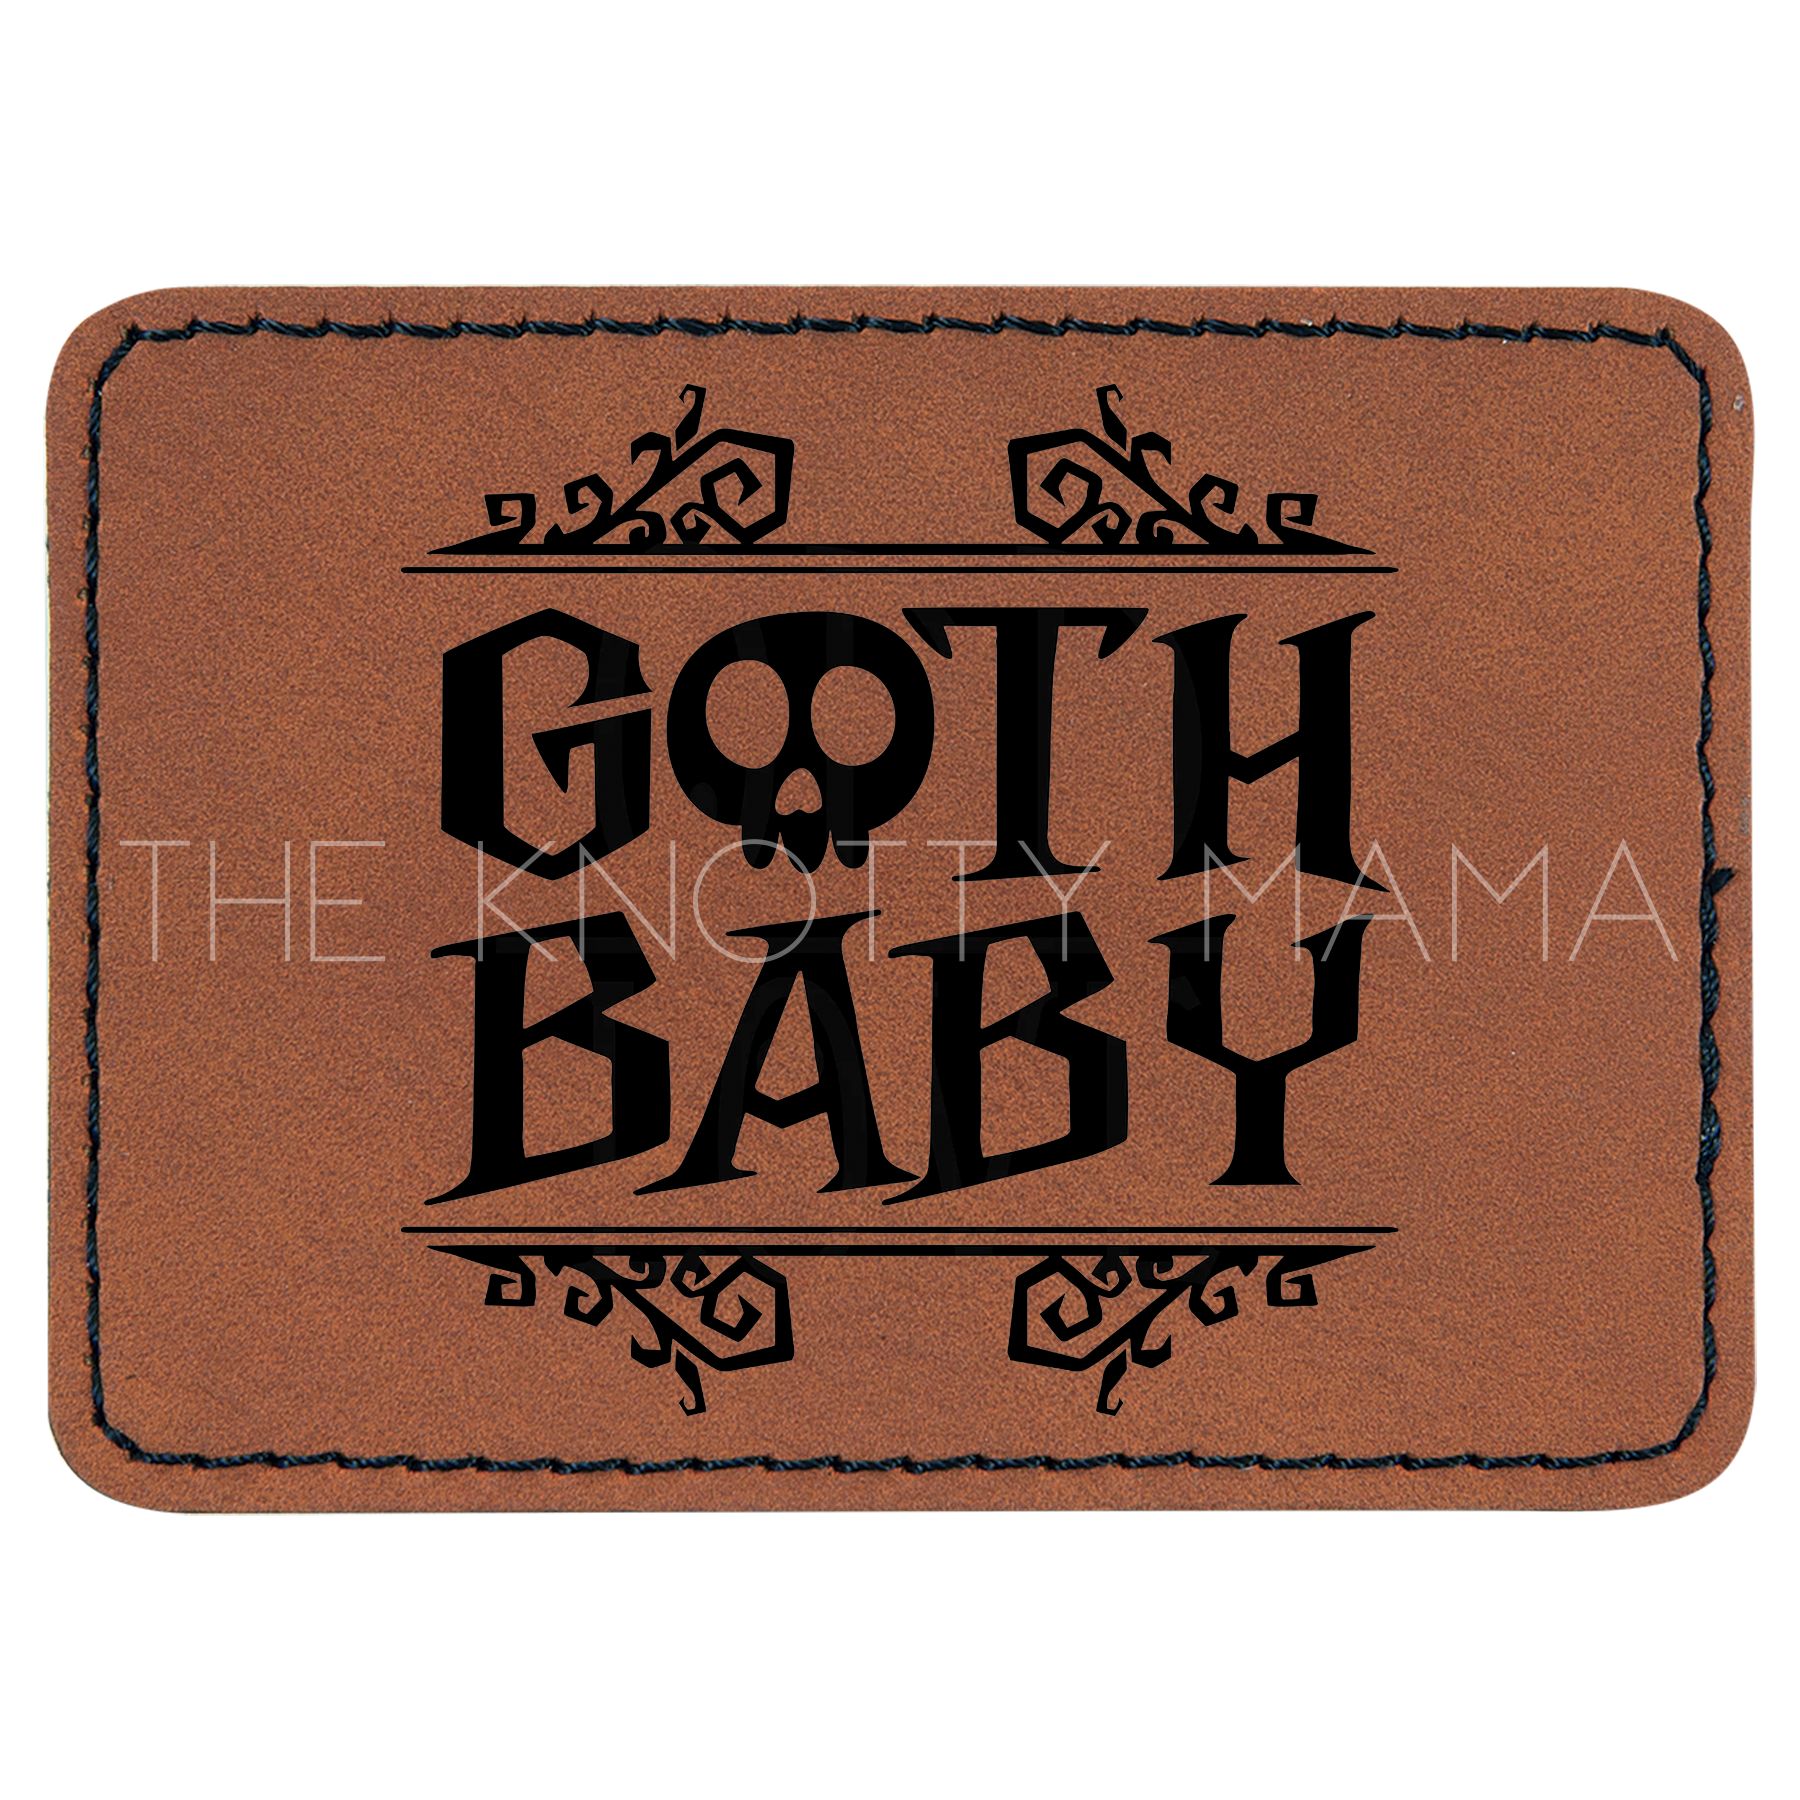 Goth Baby Patch